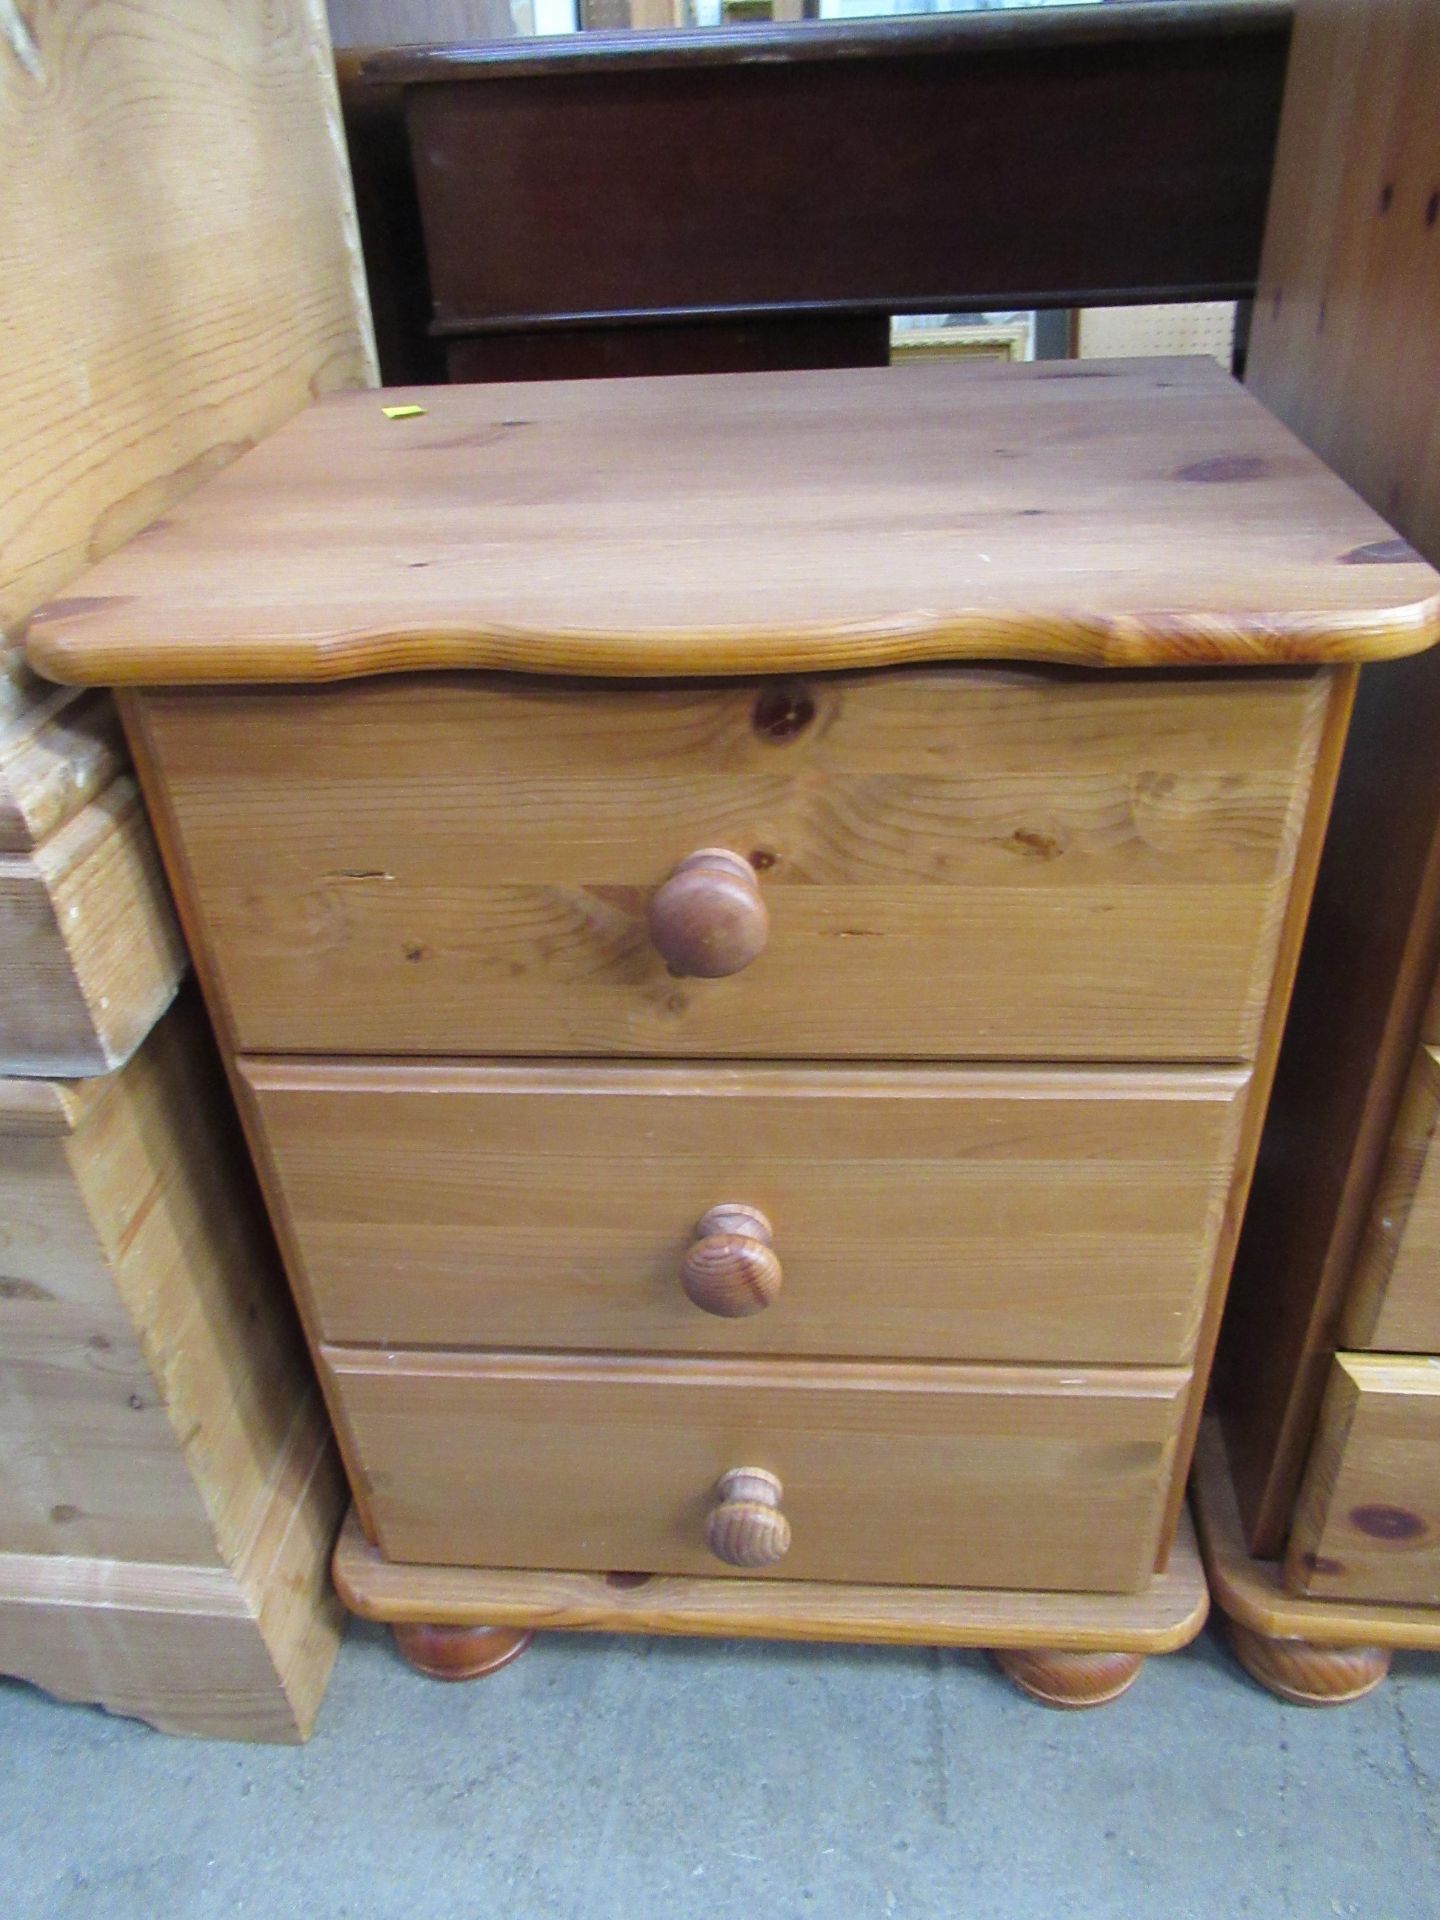 3 Piece Honey Pine Bedroom Set to Include 2 x Chest of Drawers and a Bedside Cabinet - Image 2 of 4